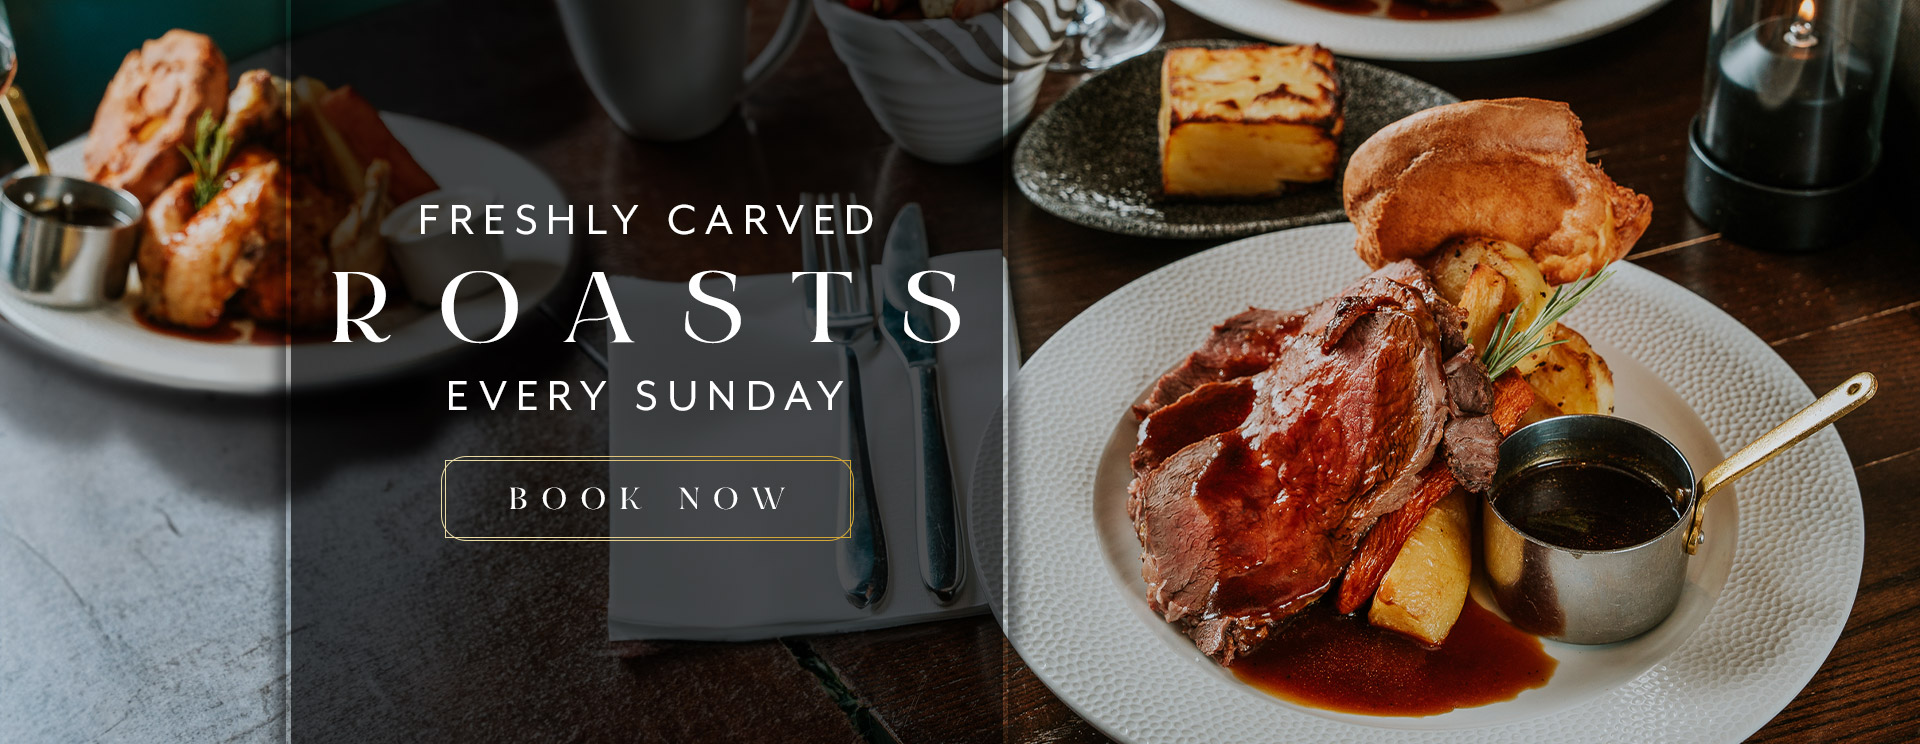 Sunday Lunch at The Spade Oak